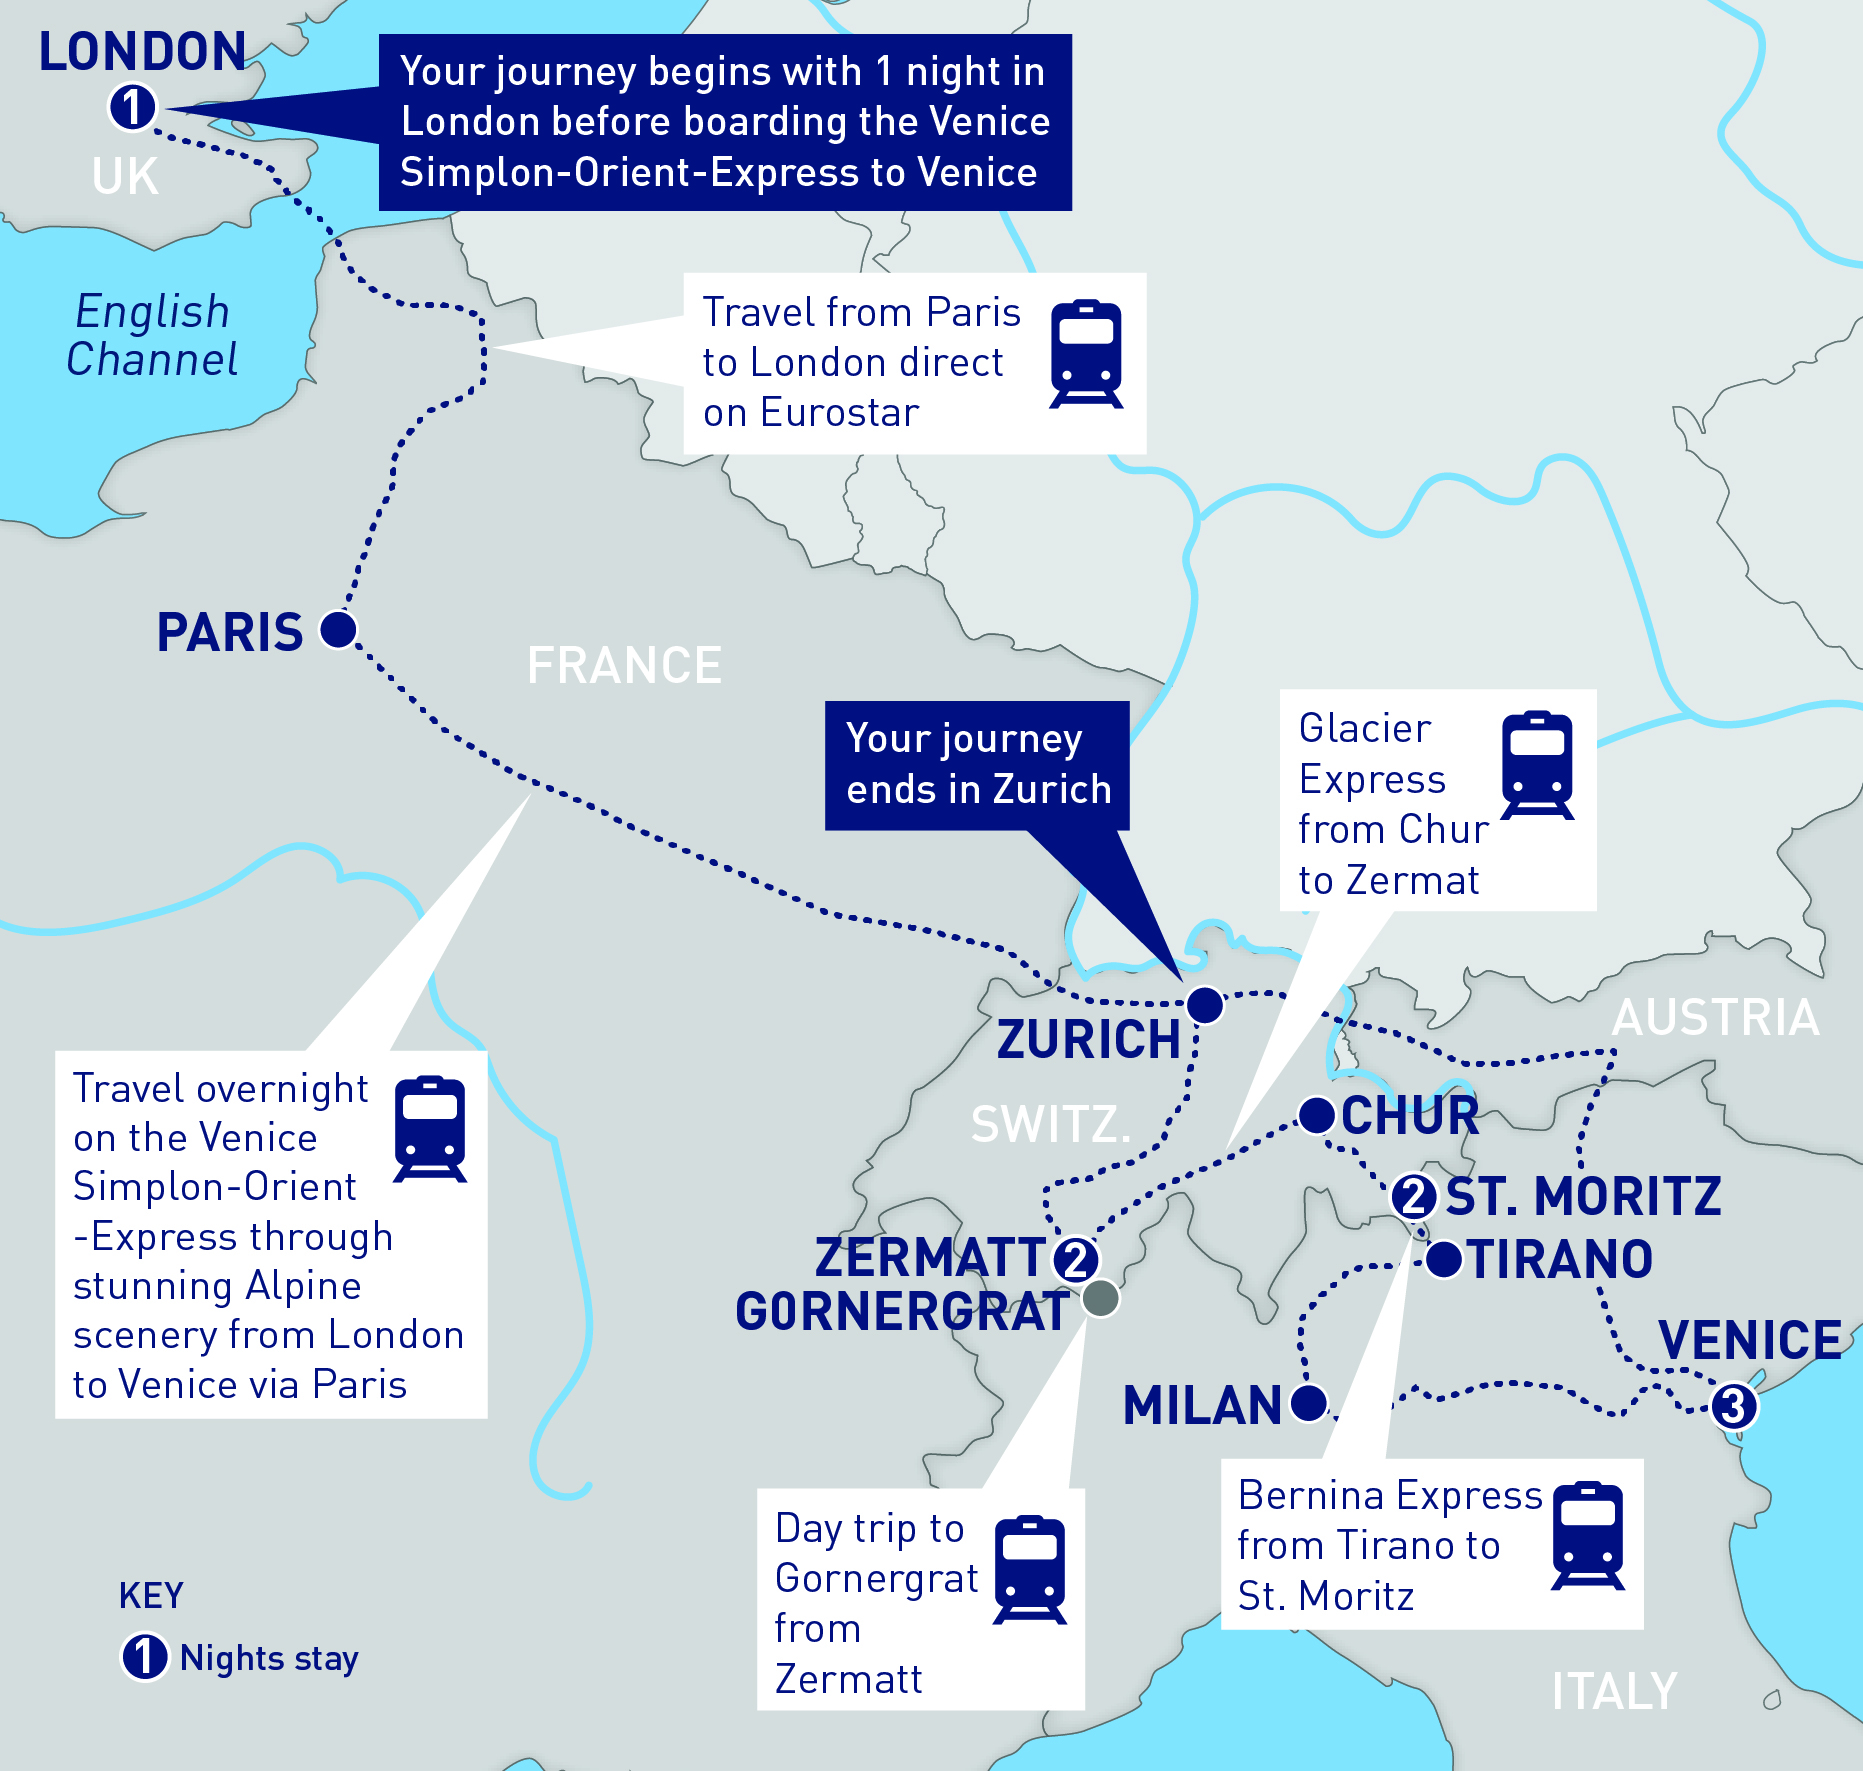 Venice Simplon-Orient-Express Reveals a New French Alps Route for